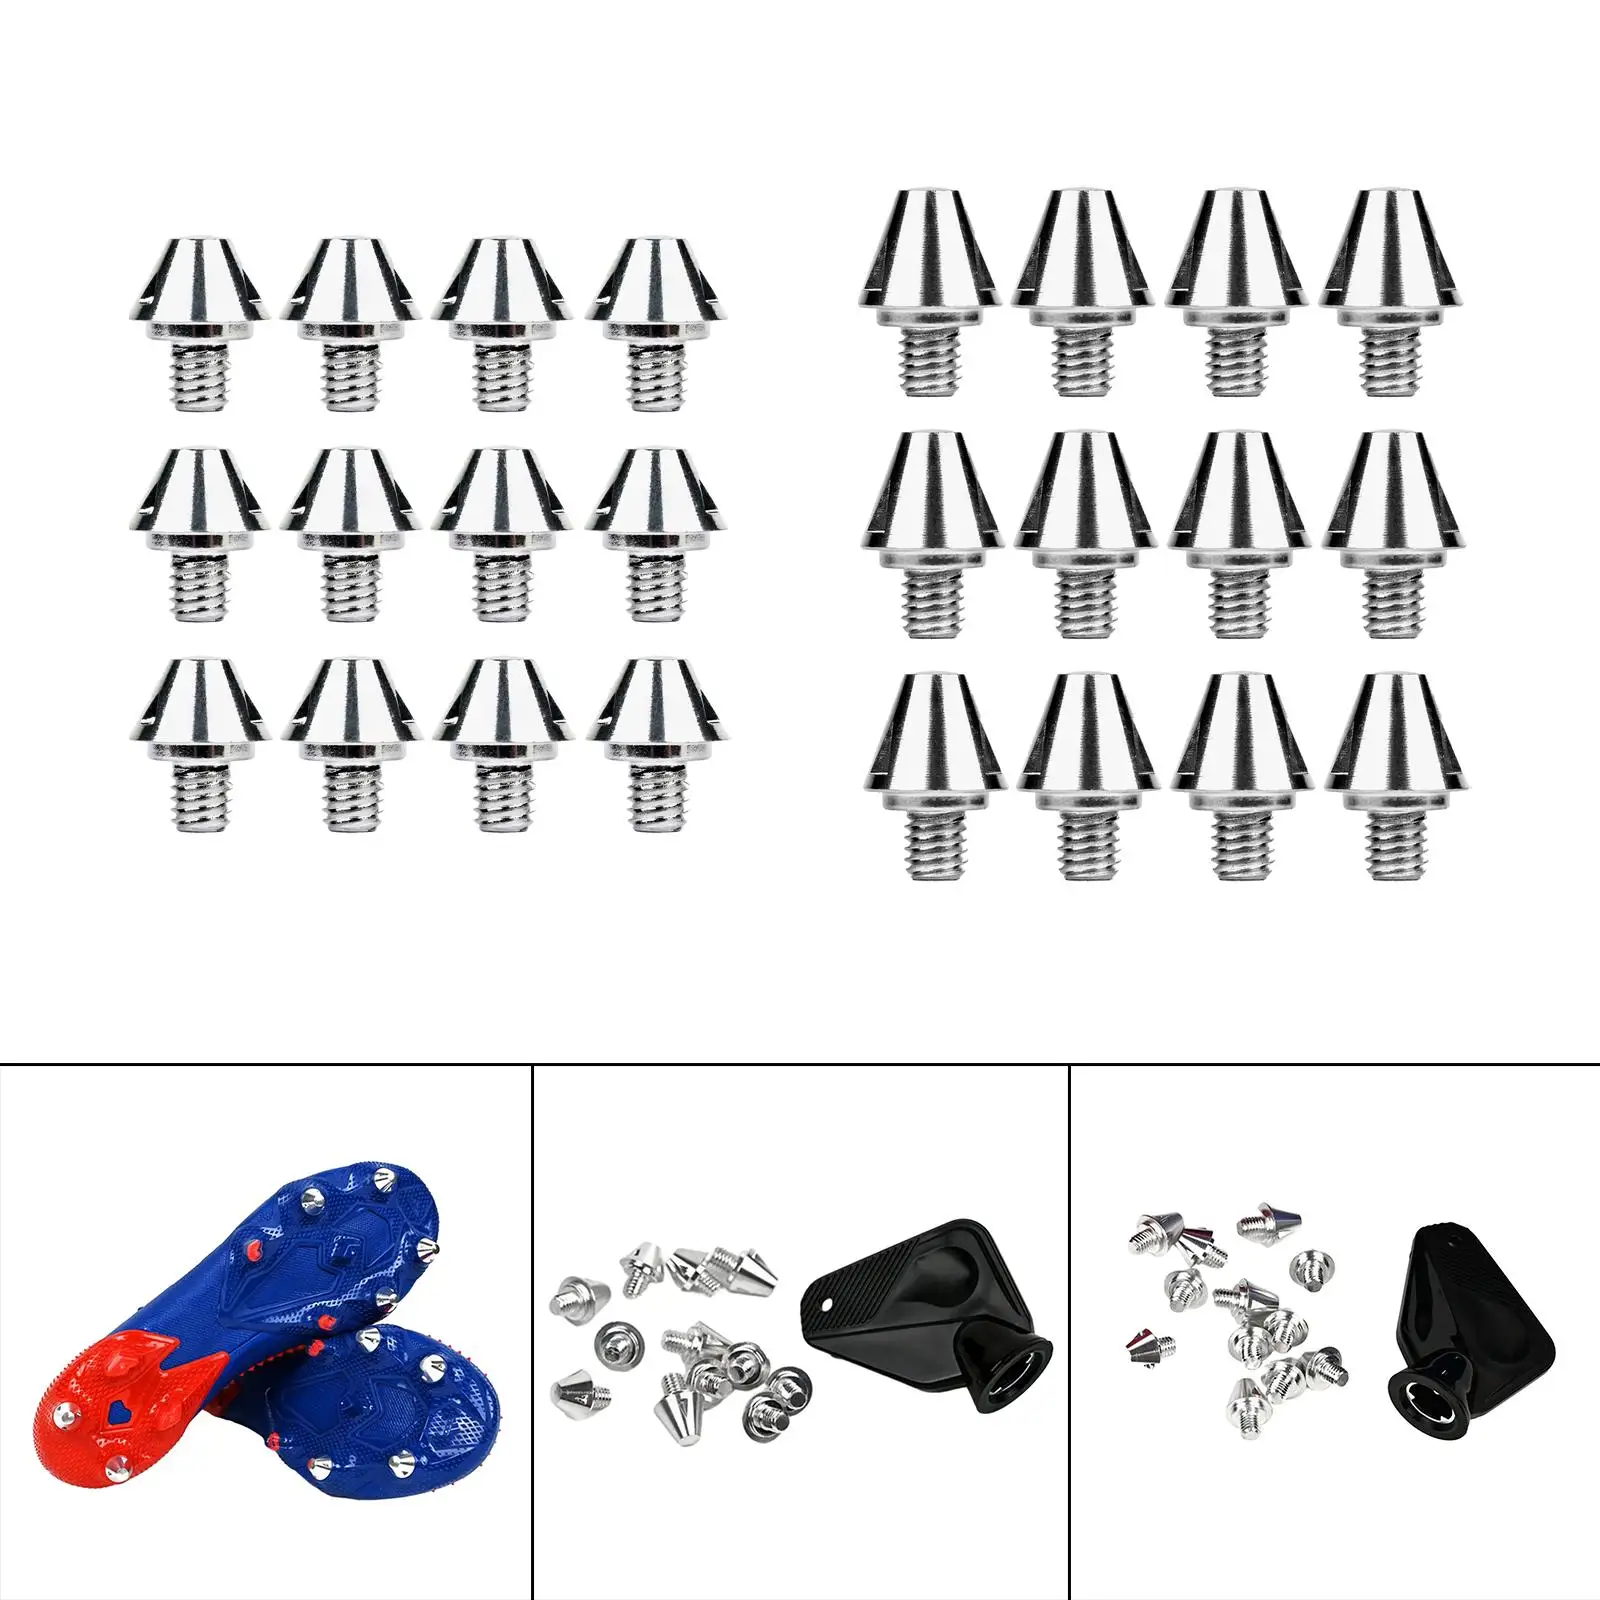 12x Rugby Studs Universal Anti Slip M6 Threaded Soccer Studs Track Shoes Spikes for Competition Indoor Outdoor Sports Training